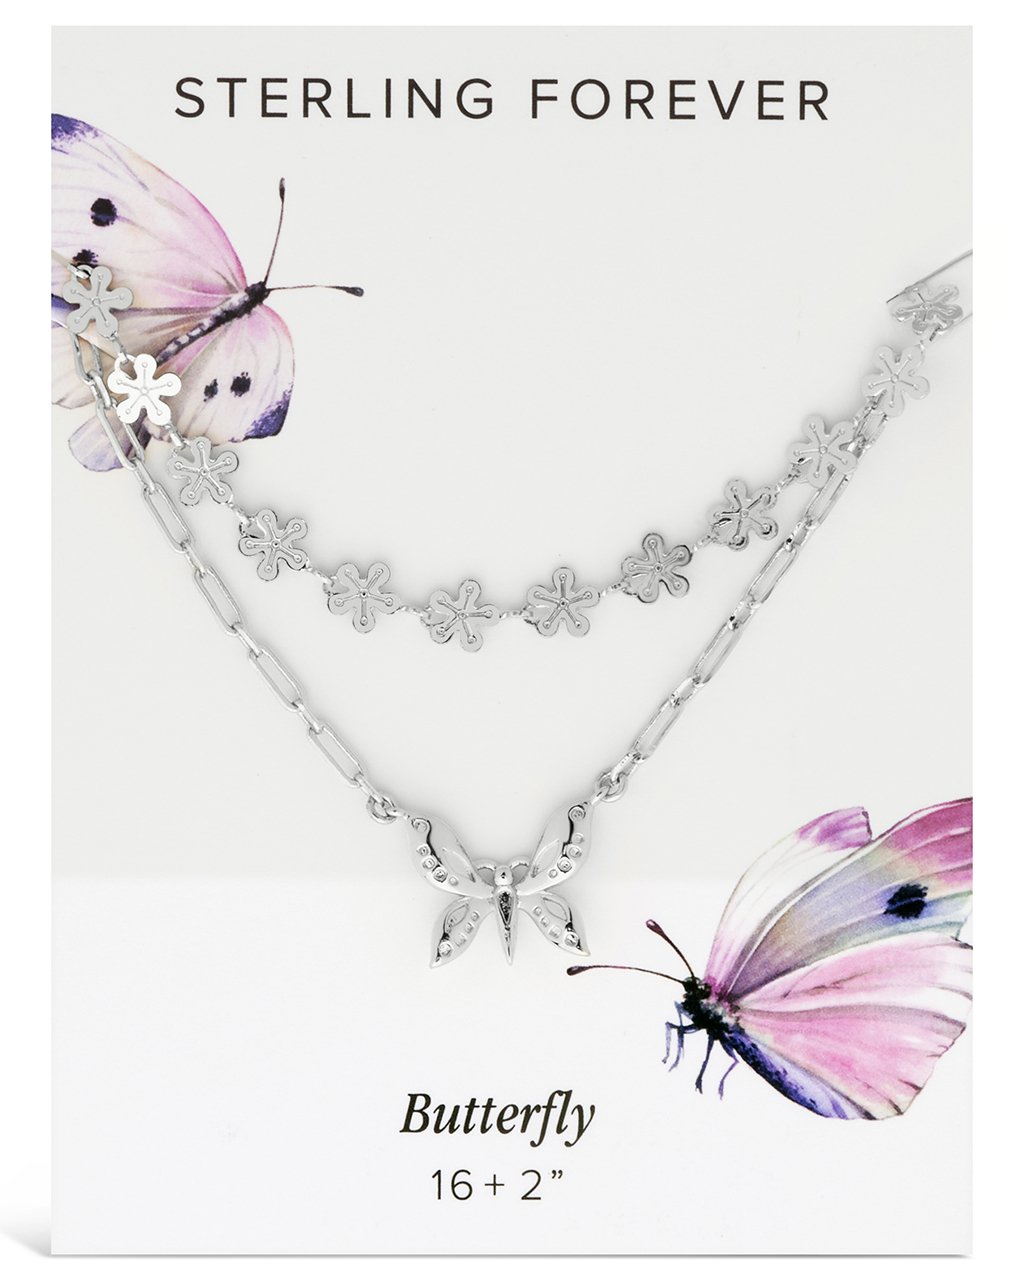 Butterfly & Daisy Chain Layered Necklace Necklace Sterling Forever 